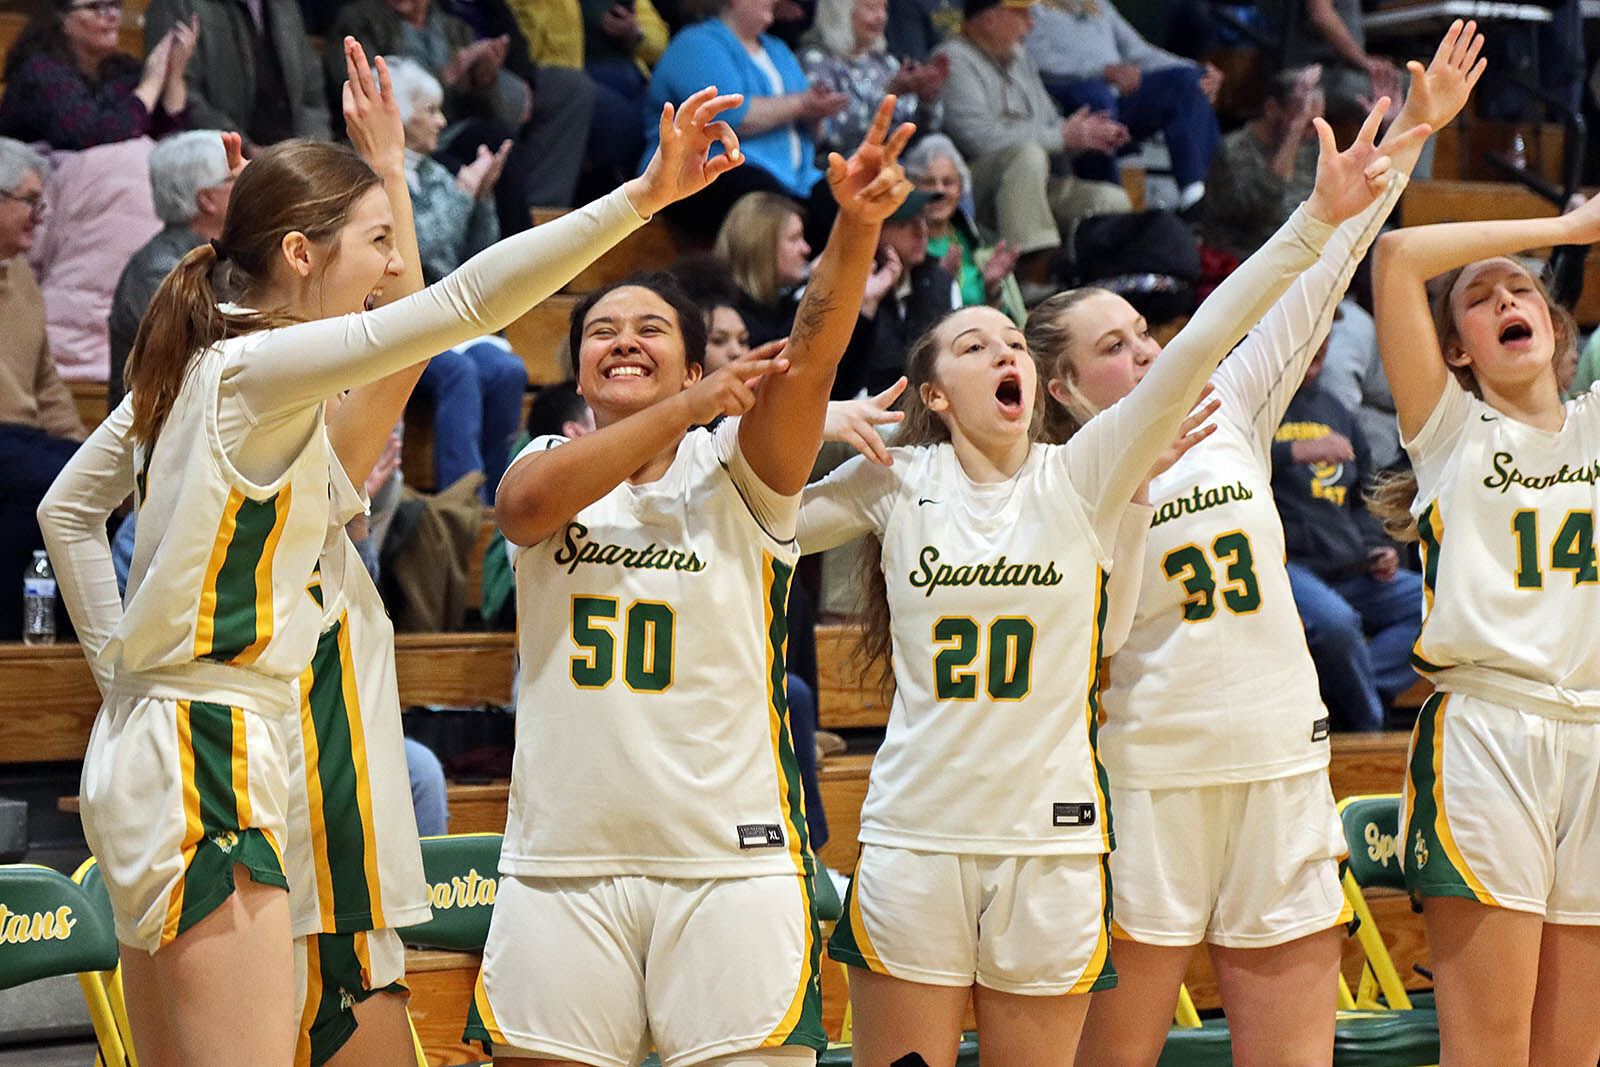 Kennedy Stewart’s 21-Point Performance Leads Greenbrier East to Victory in Dominant First Quarter